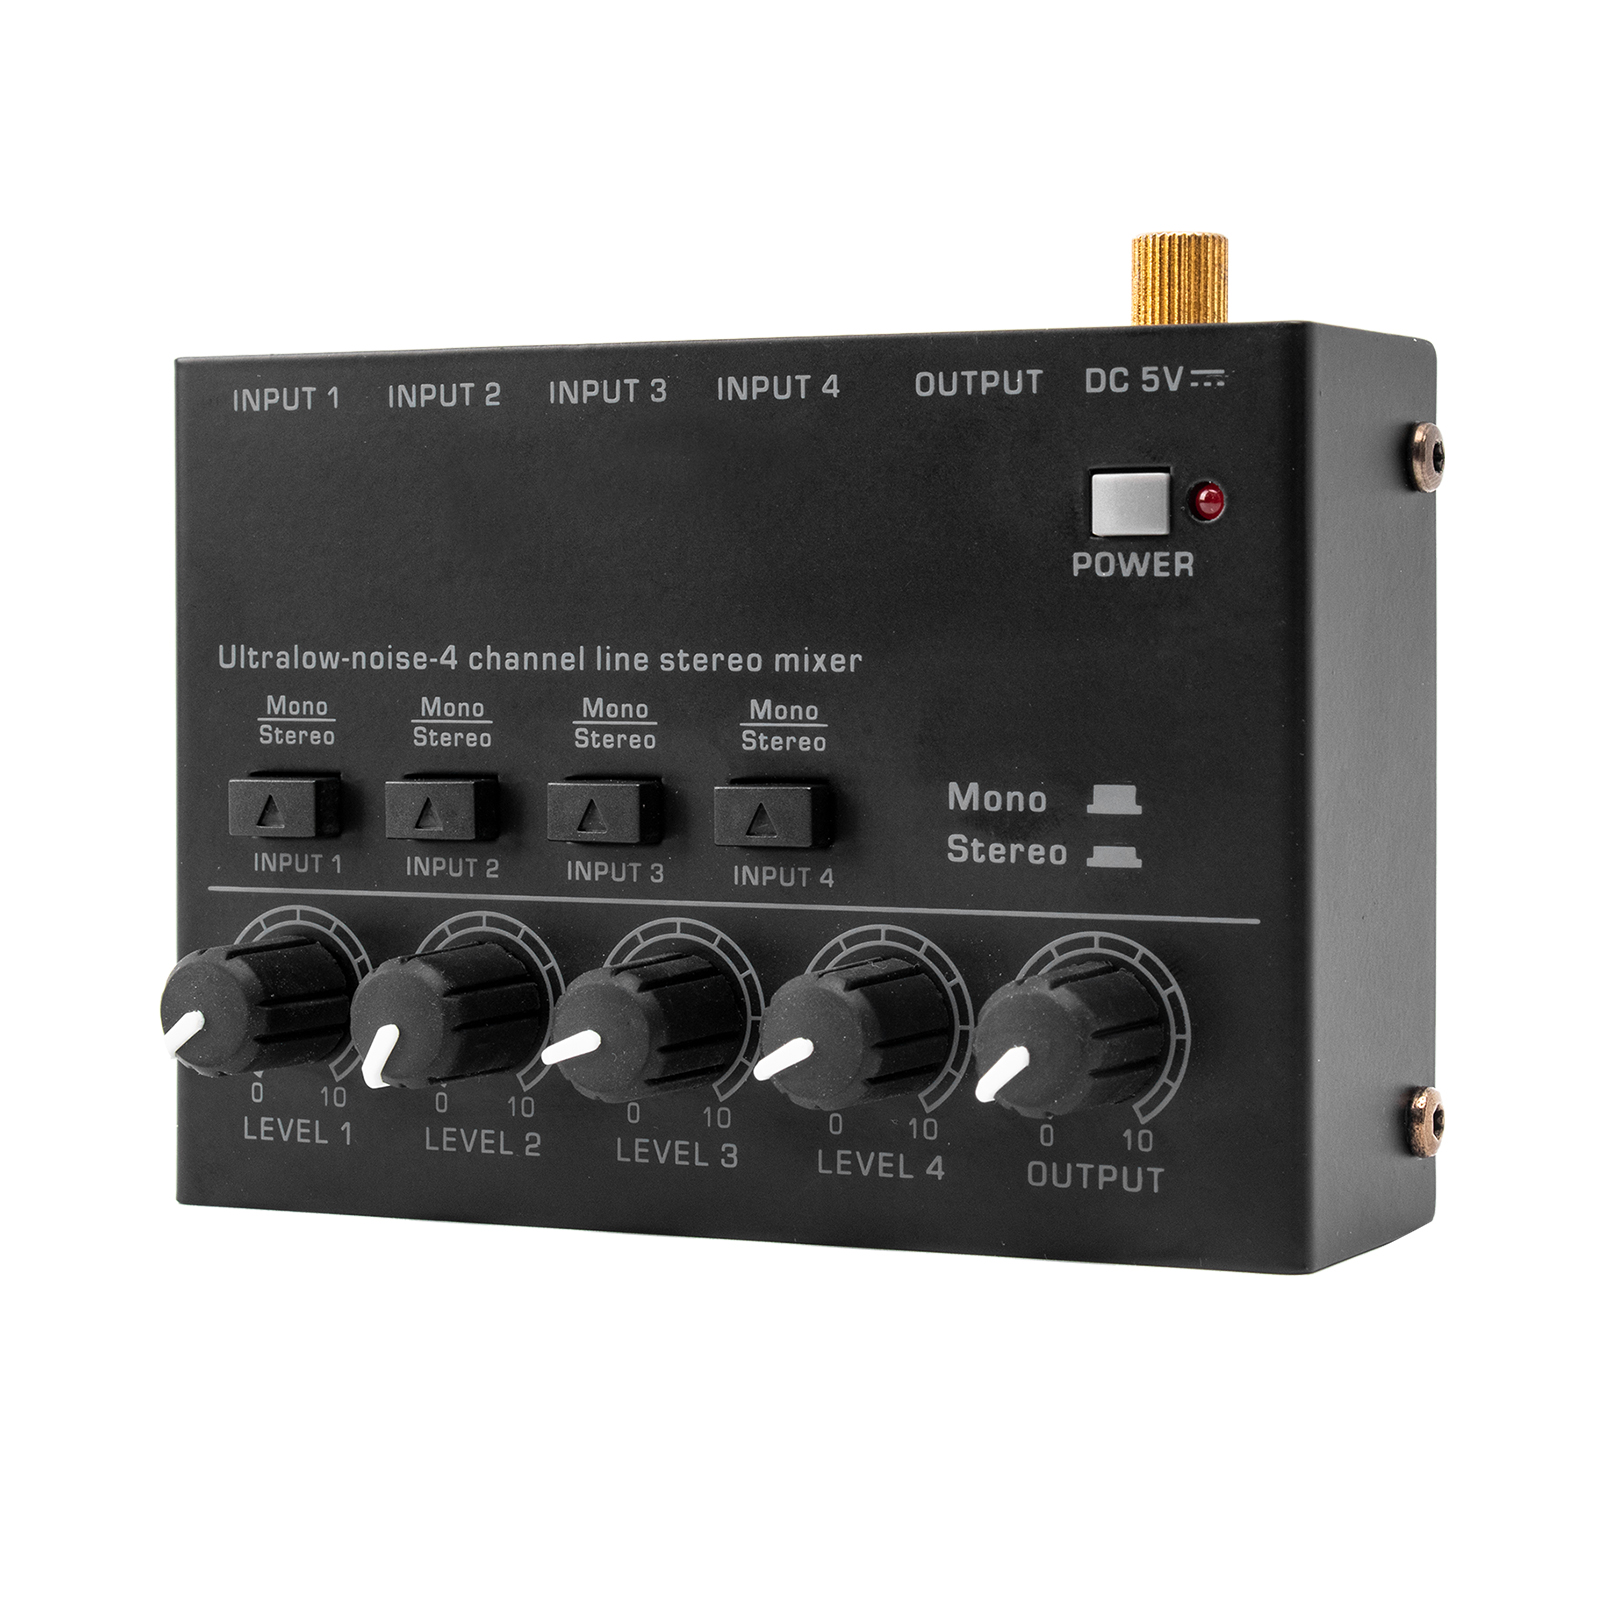 Ultra Low Noise 4 Channel Line Stereo Mixer 4 Input 1 Output DC 5V Portable Mini Audio Mixer Microphone Guitar Bass Keyboard Mixers for Bar Stage Studio - image 1 of 7